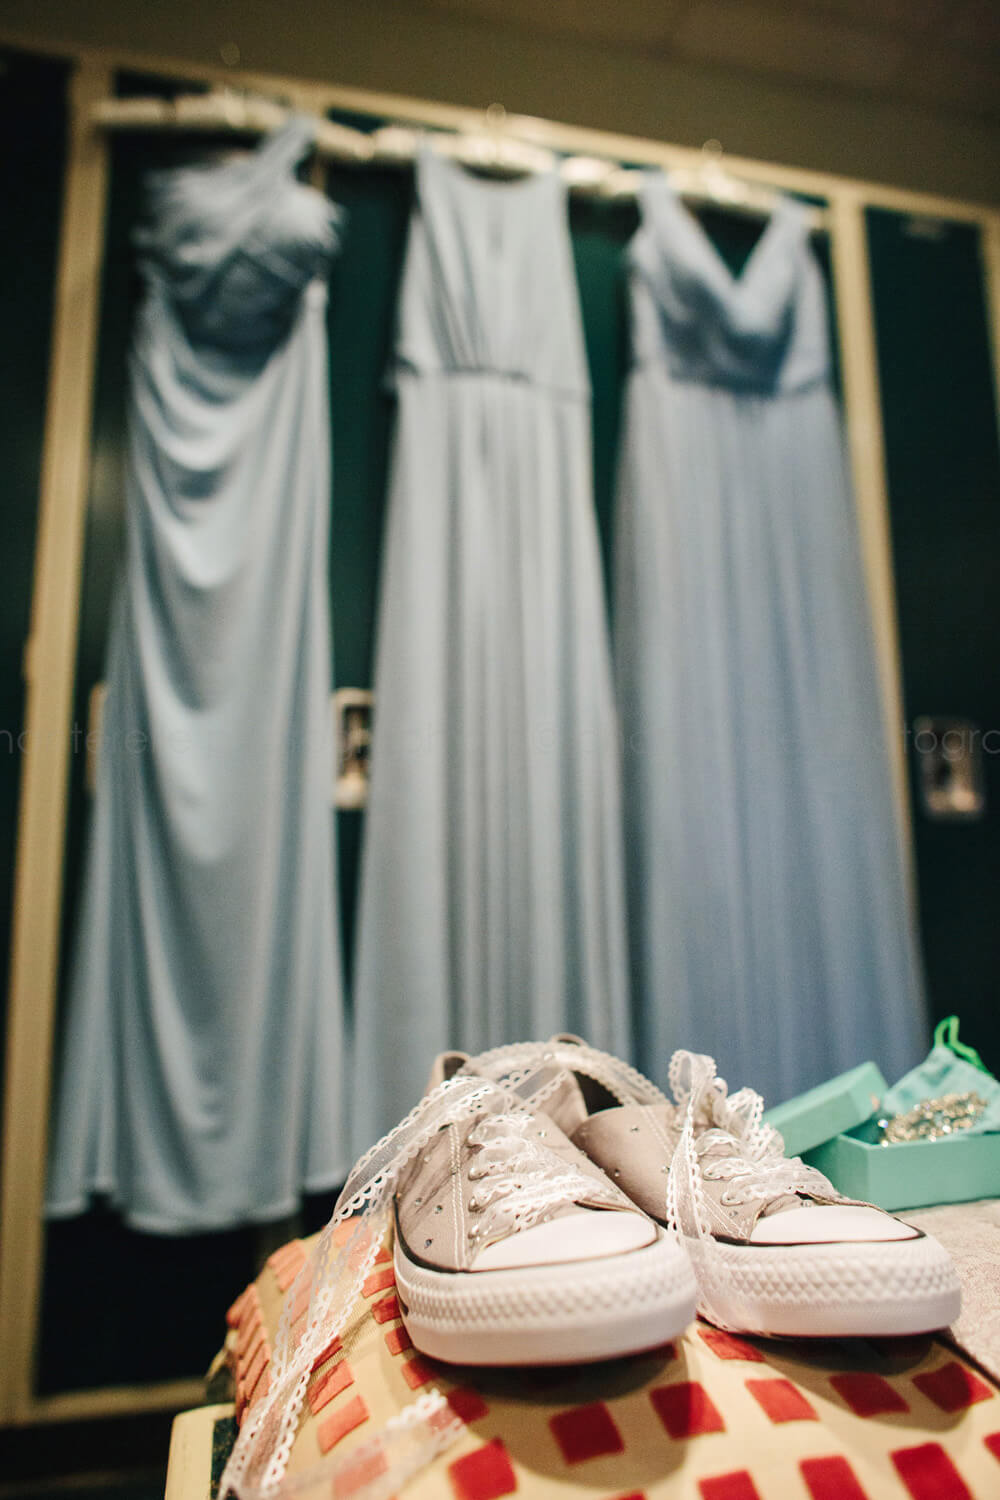 bridesmaids dresses and converse shoes